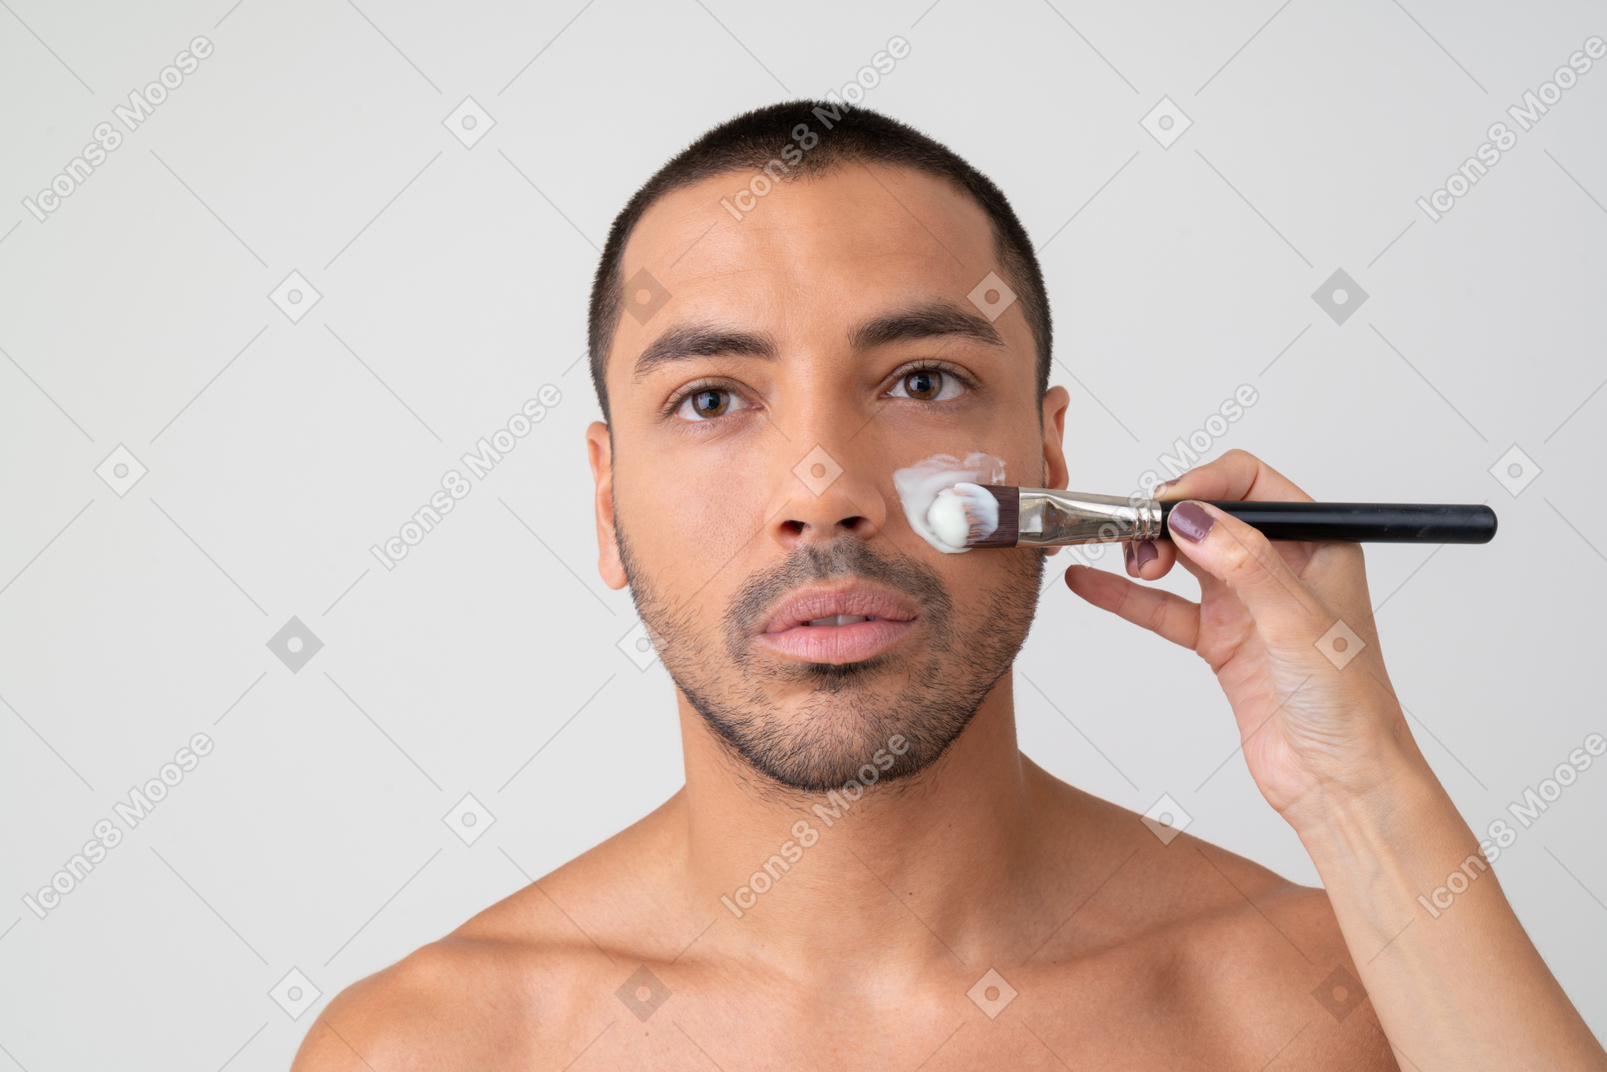 Beauty procedures before get out to the world